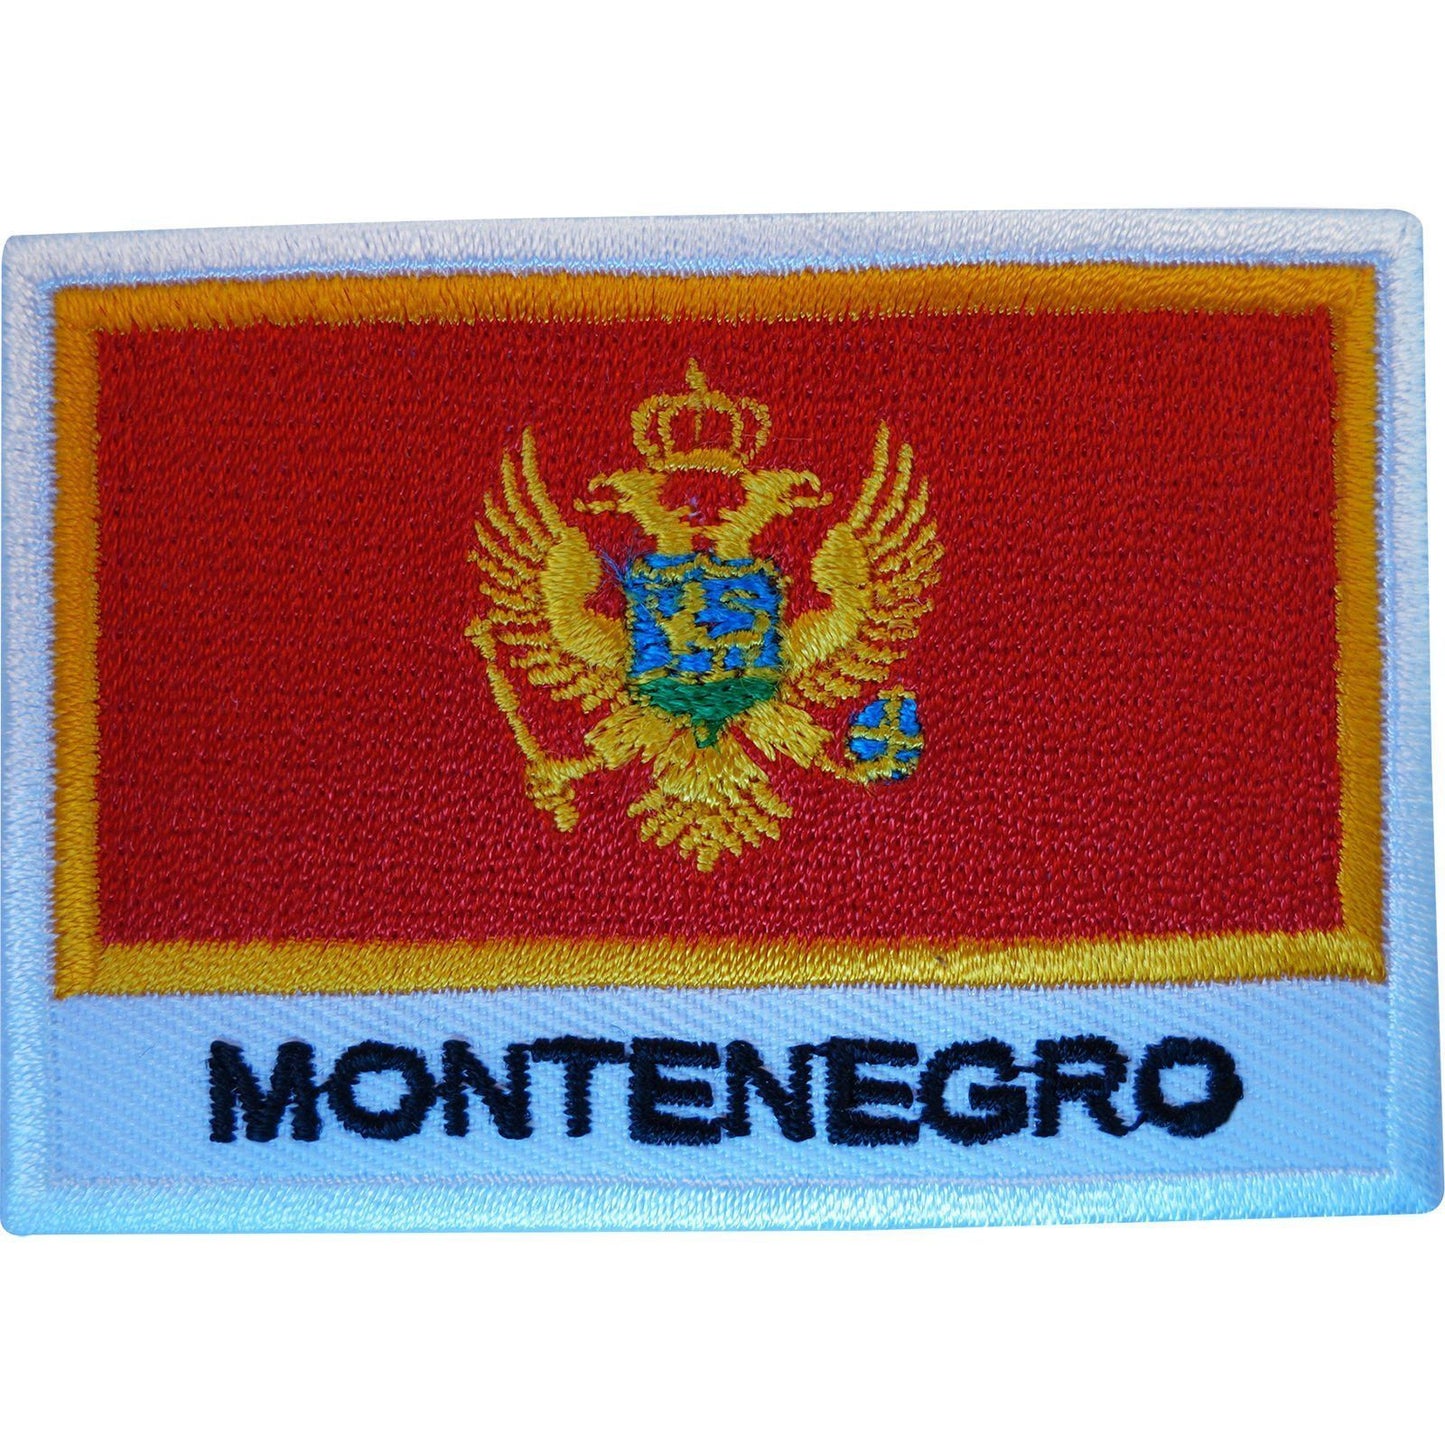 Montenegro Flag Patch Montenegrin Iron On Sew On Clothes Bag Embroidered Badge